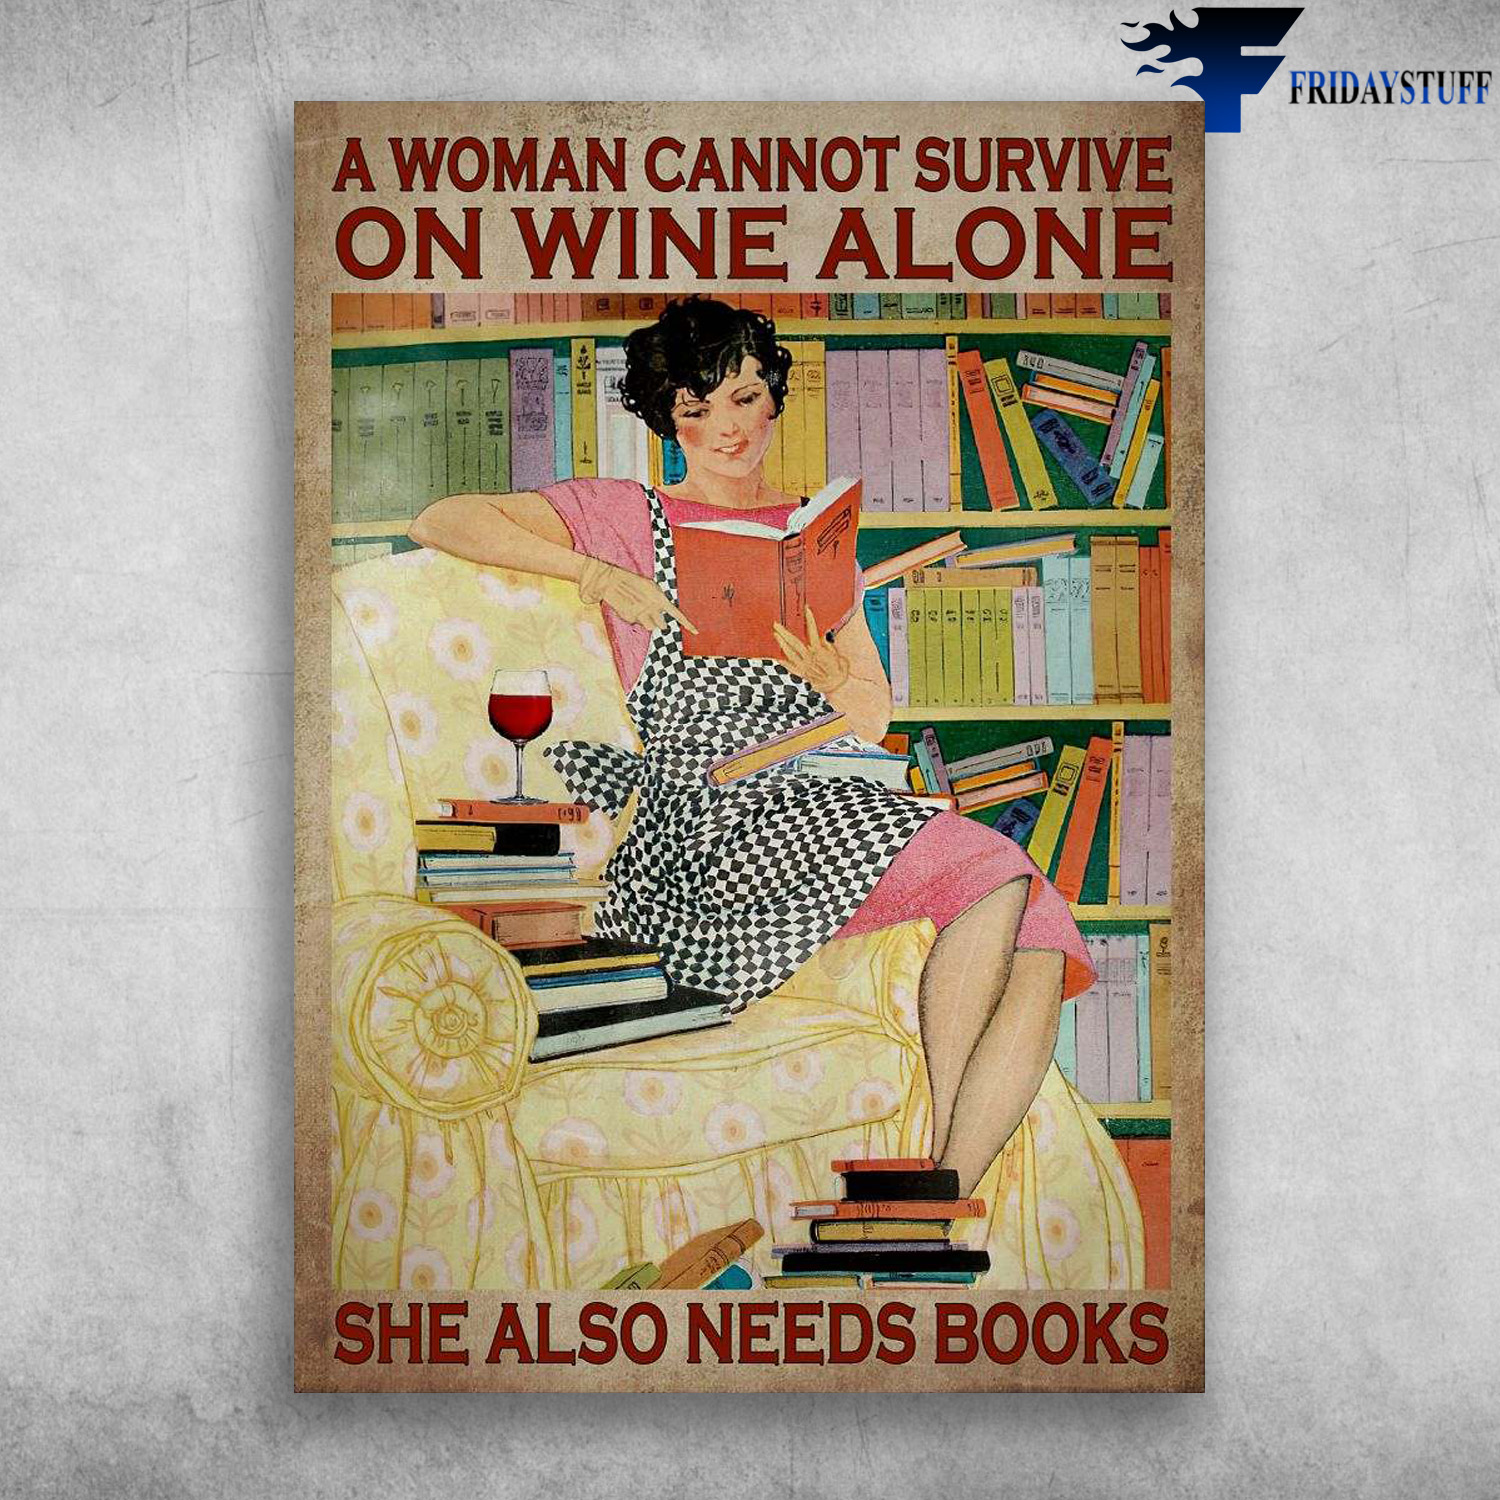 Girl Reading, Wine And Book - A Woman Cannot Survive, On Wine Alone, She Also Needs Books